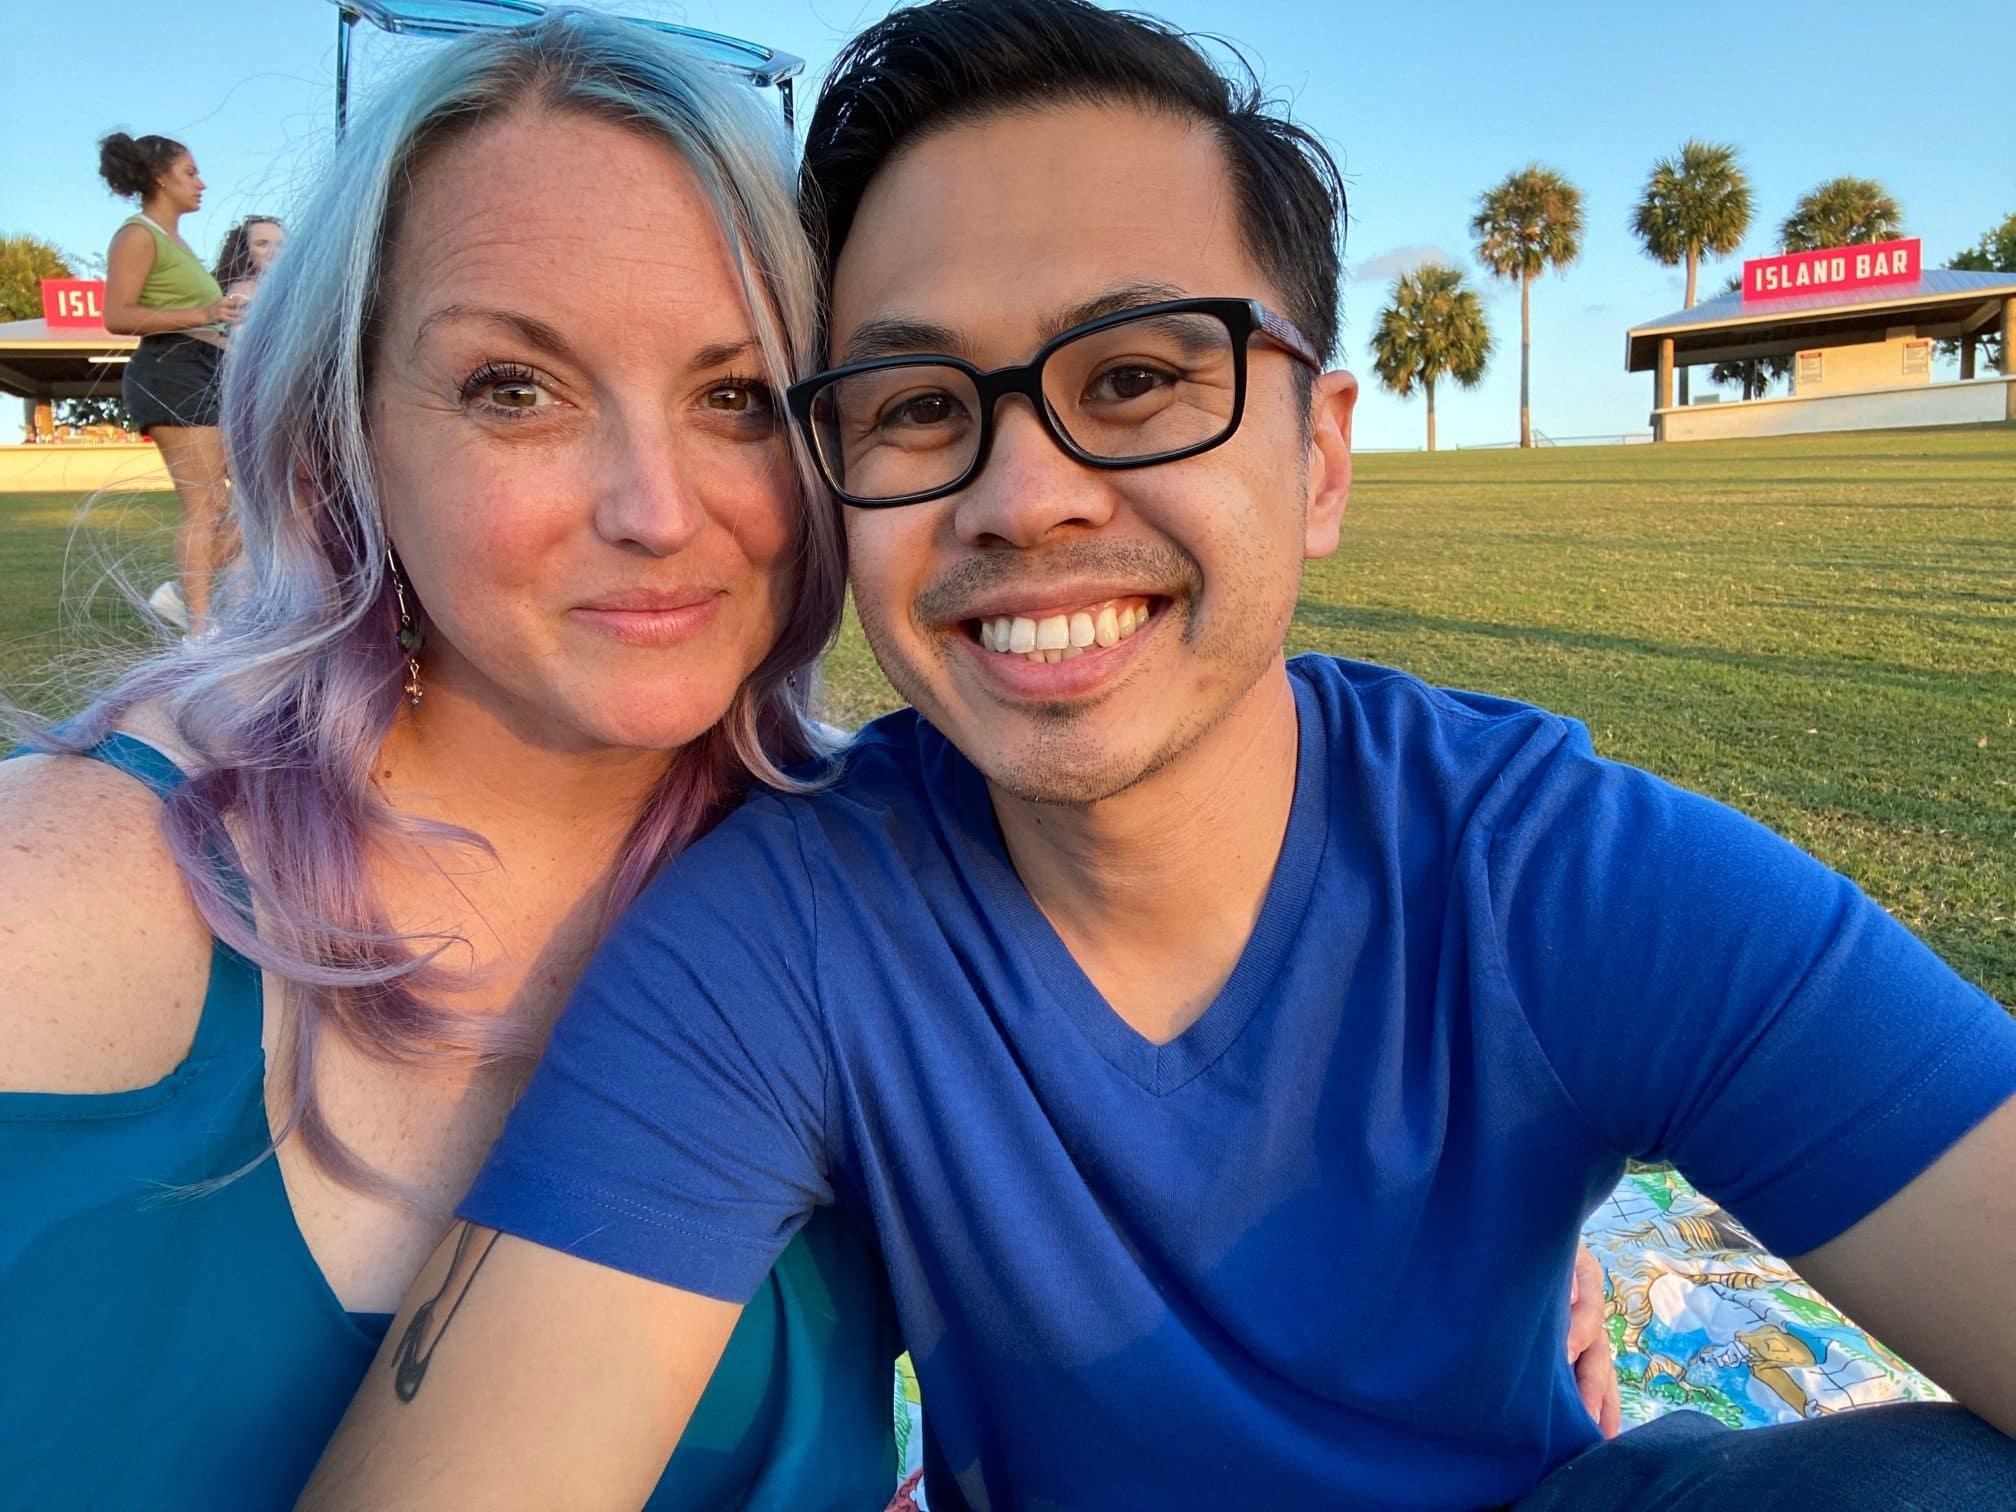 couple sit in the grass smiling together for selfie